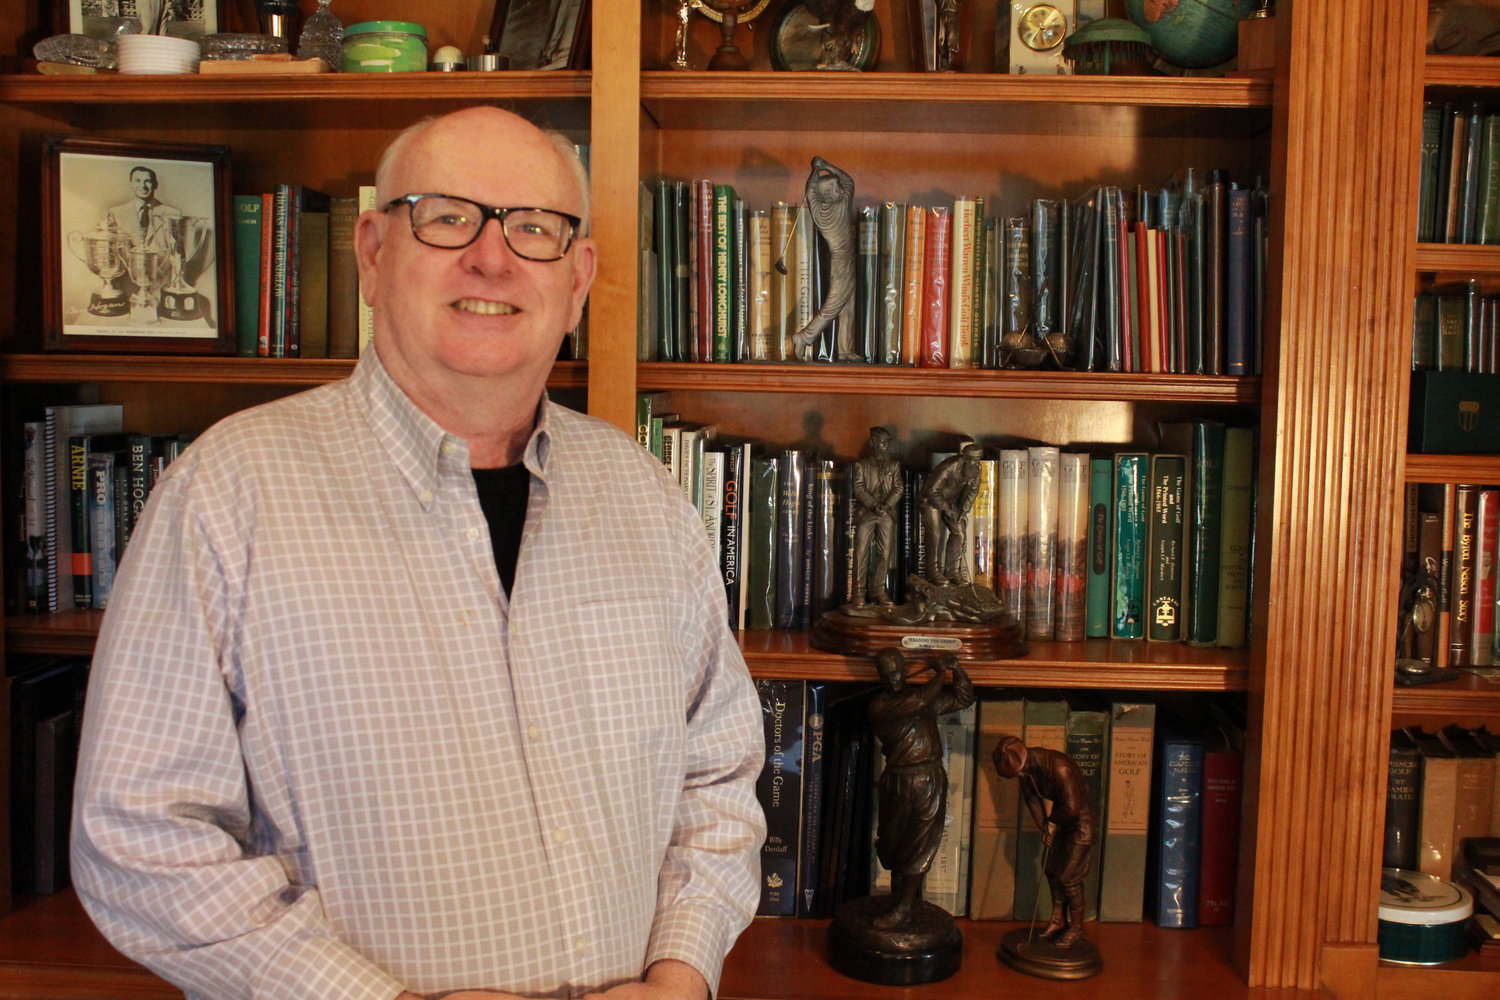 Billy Dettlaff stands in his study, surrounded by golf memorabilia. He started the first chapter of The American Golf Memories Project in Ponte Vedra Beach as his way of “giving back to the game.”